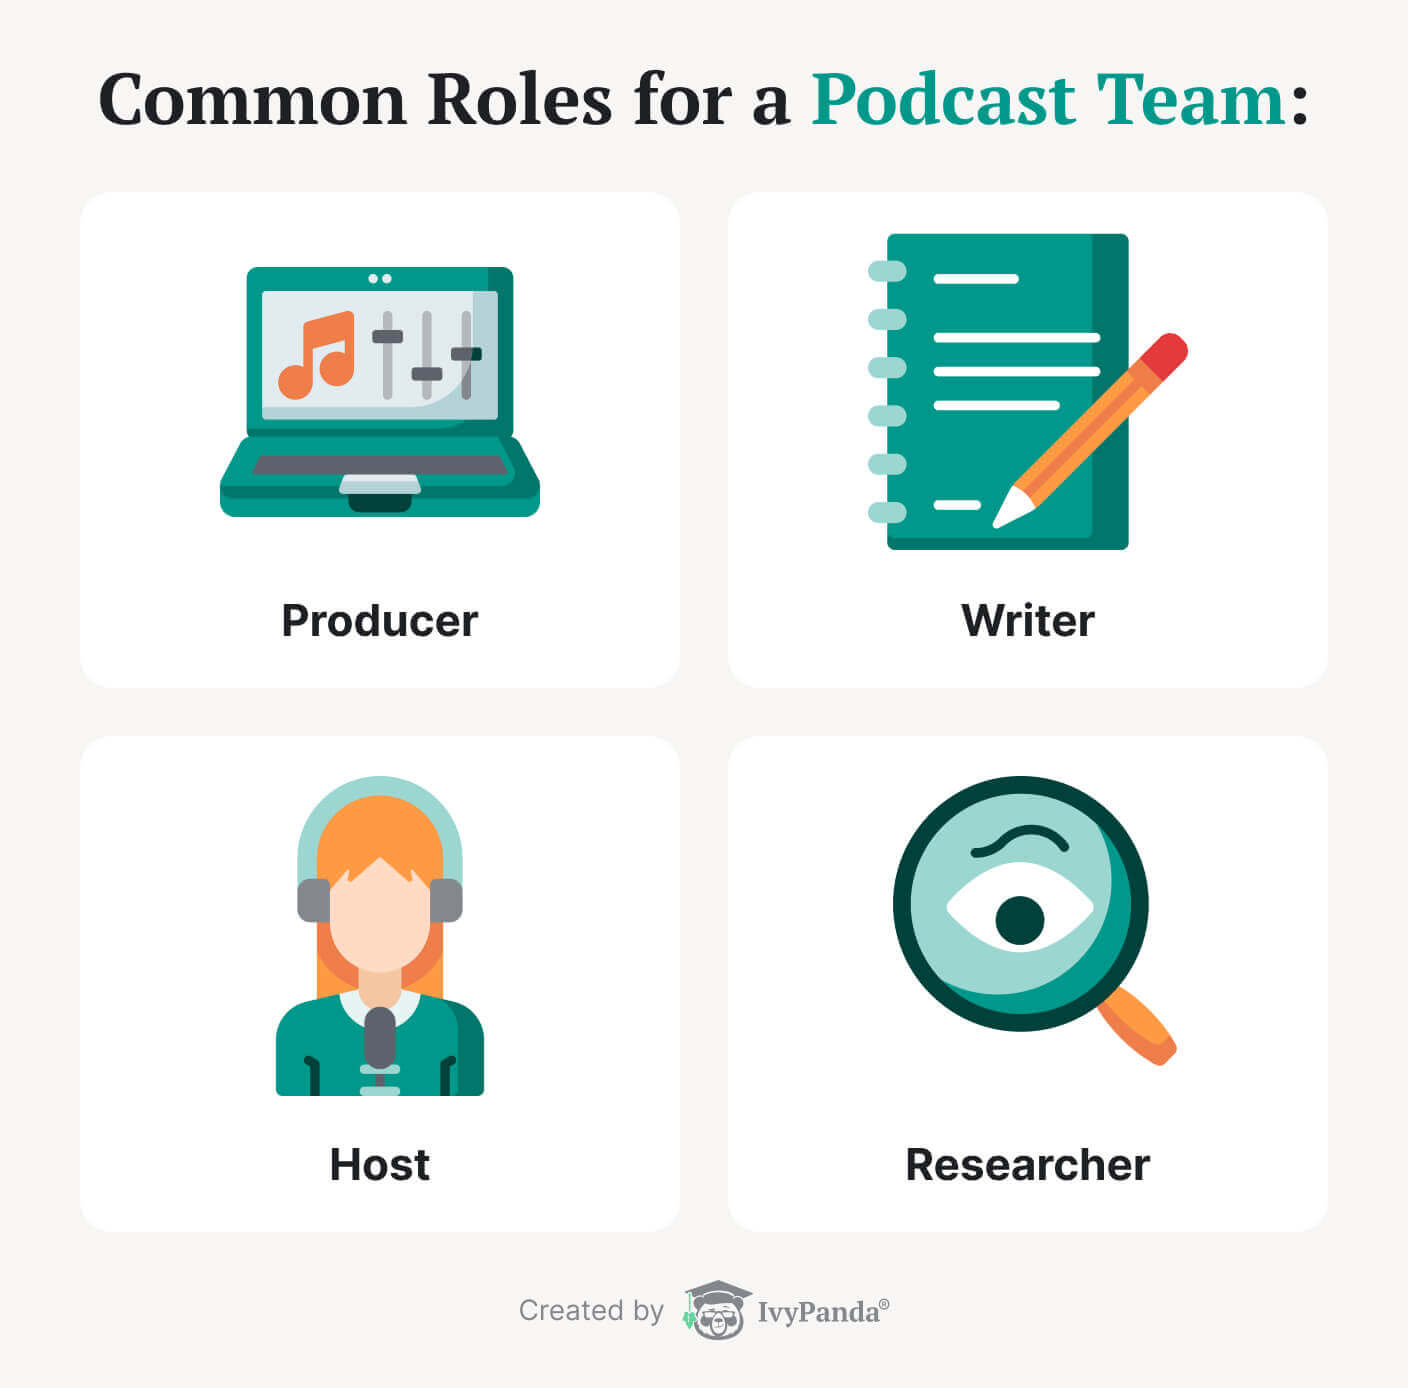 The picture enumerates the common roles found in a podcast team.